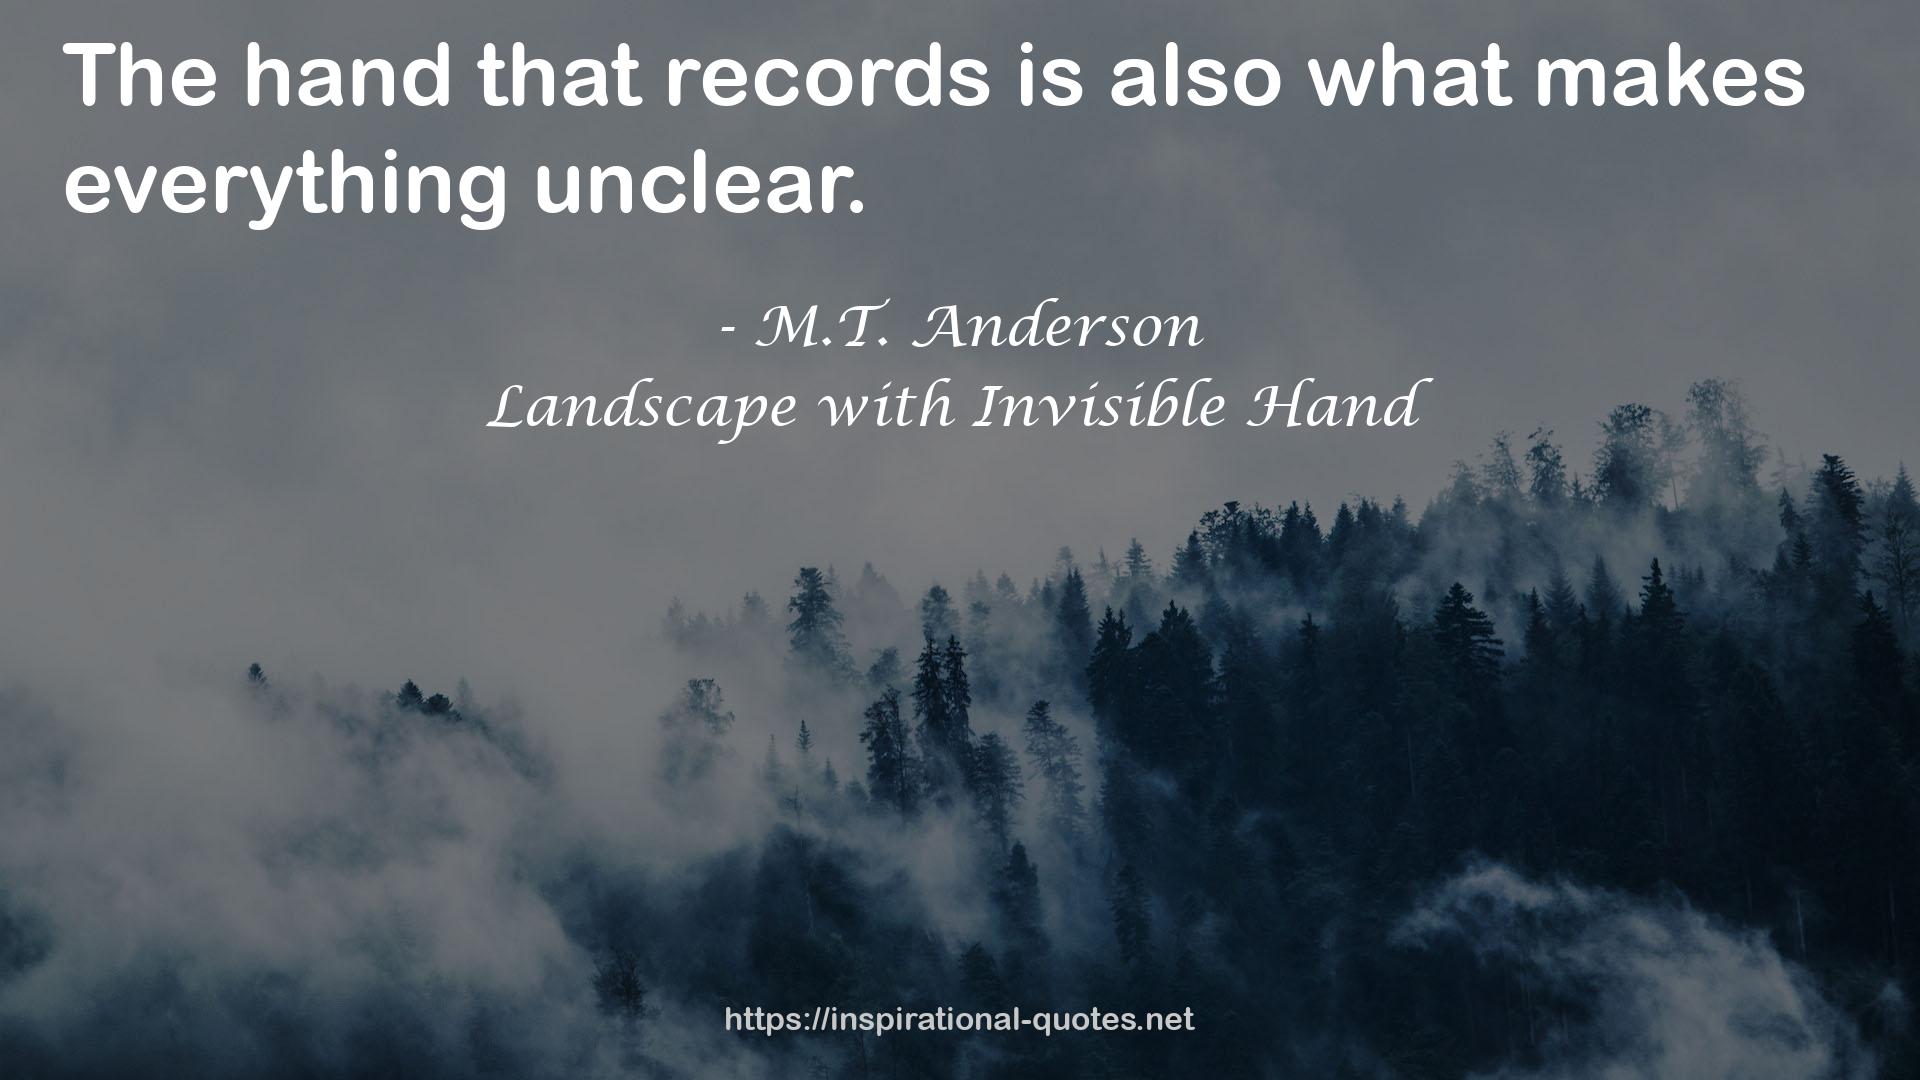 Landscape with Invisible Hand QUOTES